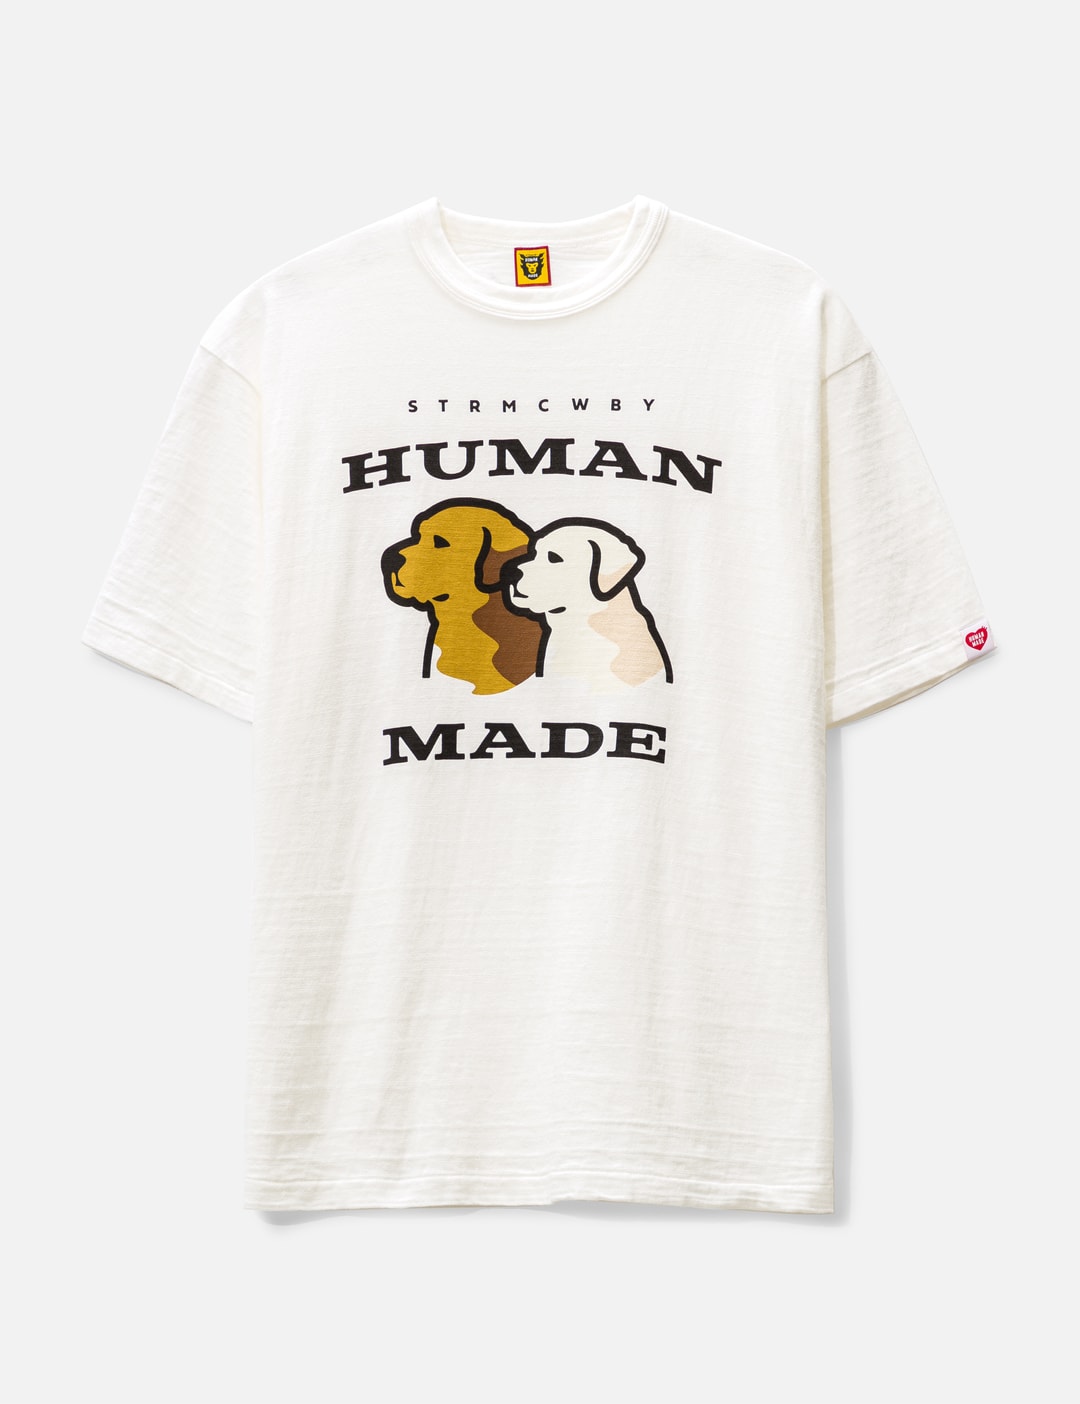 Human Made - Graphic T-shirt #2  HBX - Globally Curated Fashion and  Lifestyle by Hypebeast